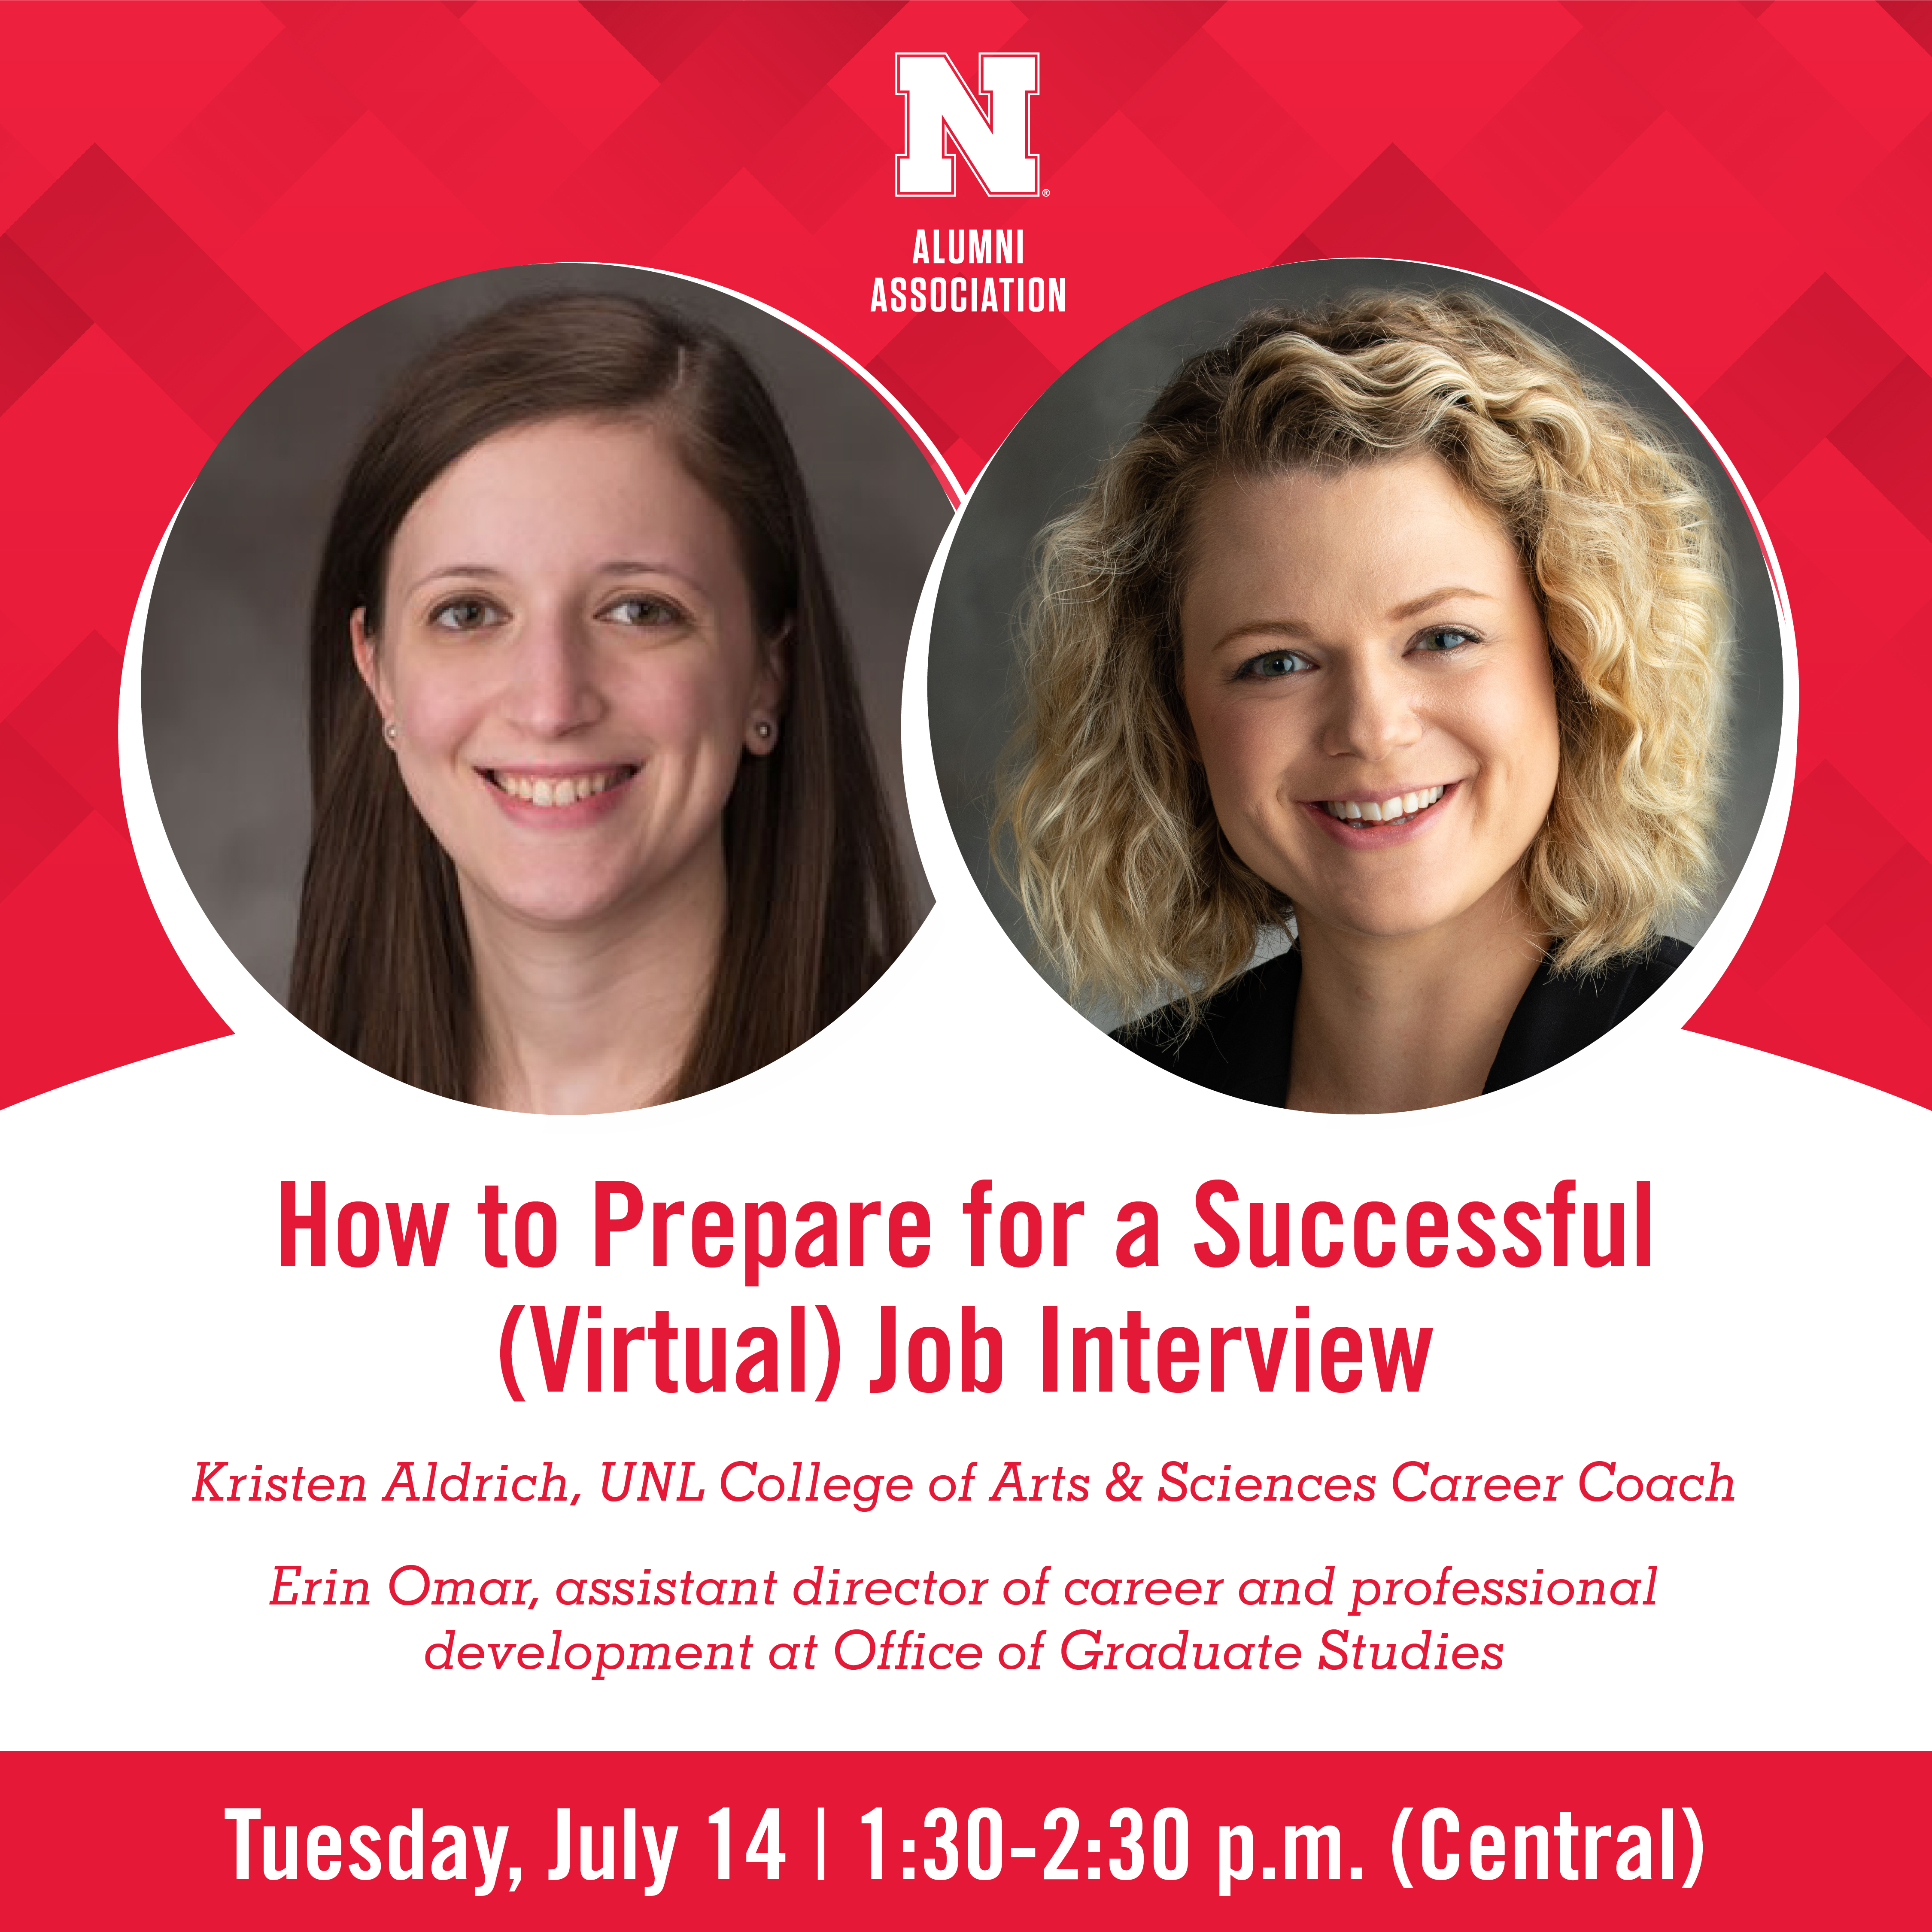 In this webinar, you’ll learn how to prepare for an upcoming virtual interview as well as what to do during and after to make a positive impression.